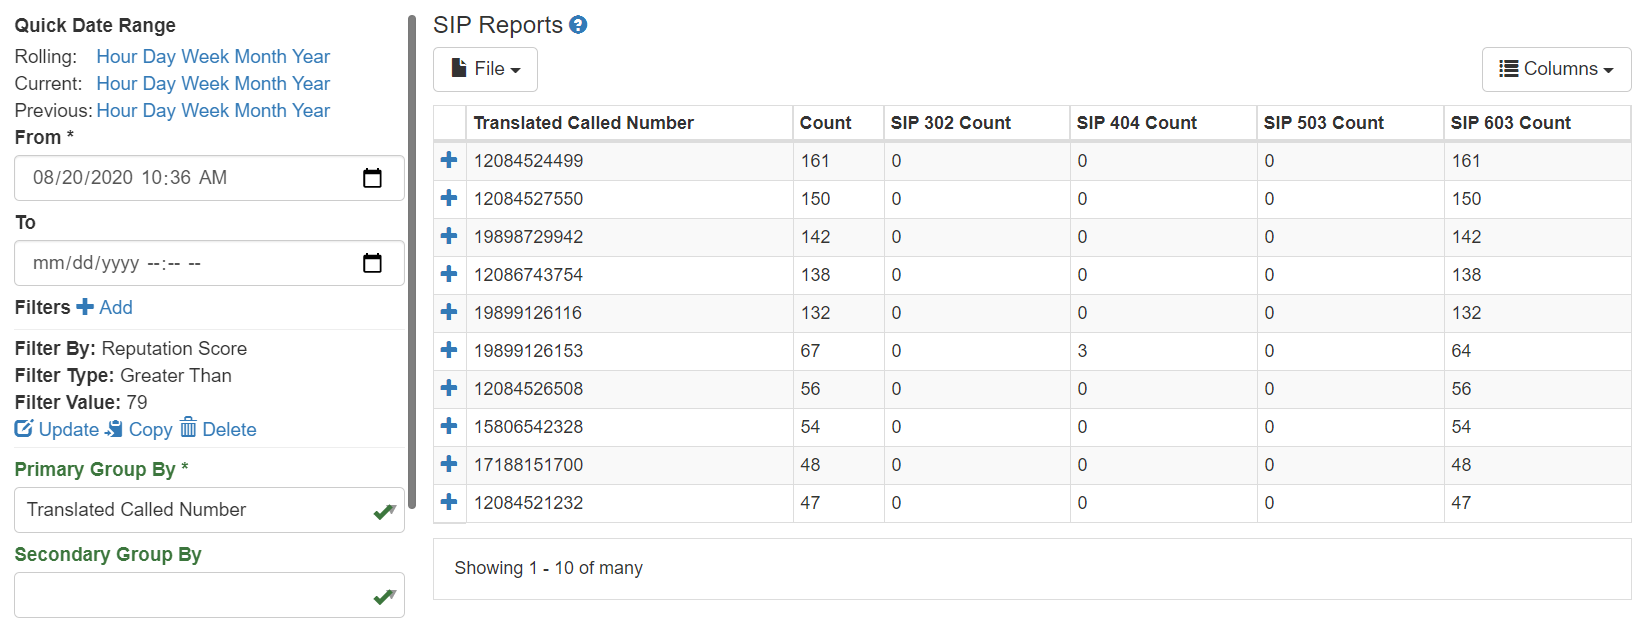 View SIP Reports to see high reputation called numbers